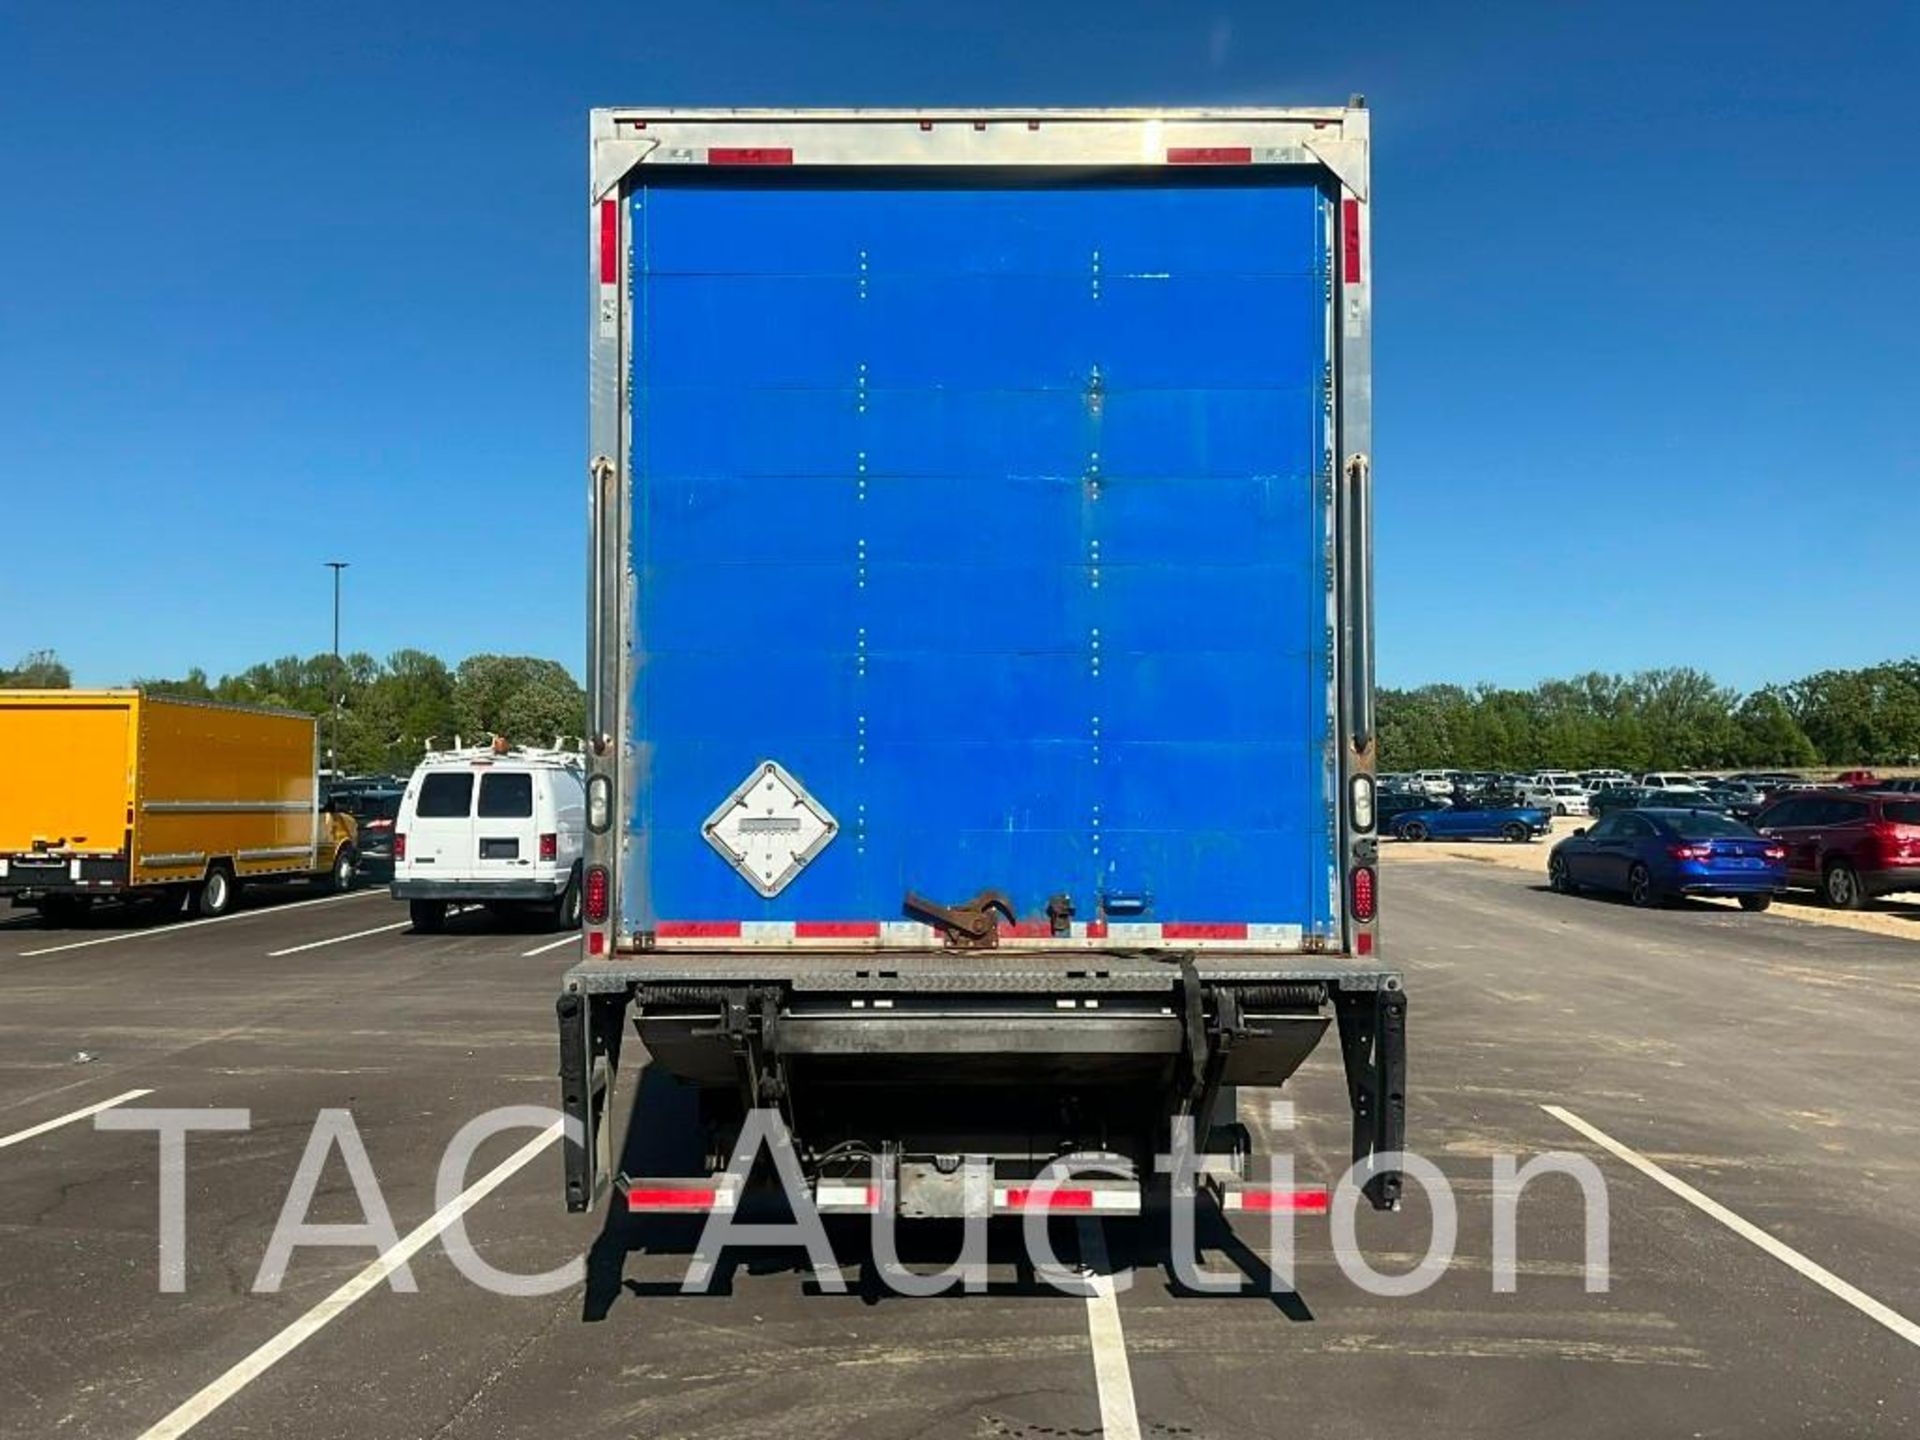 2018 Freightliner M2 Business Class 26ft Box Truck - Image 6 of 54